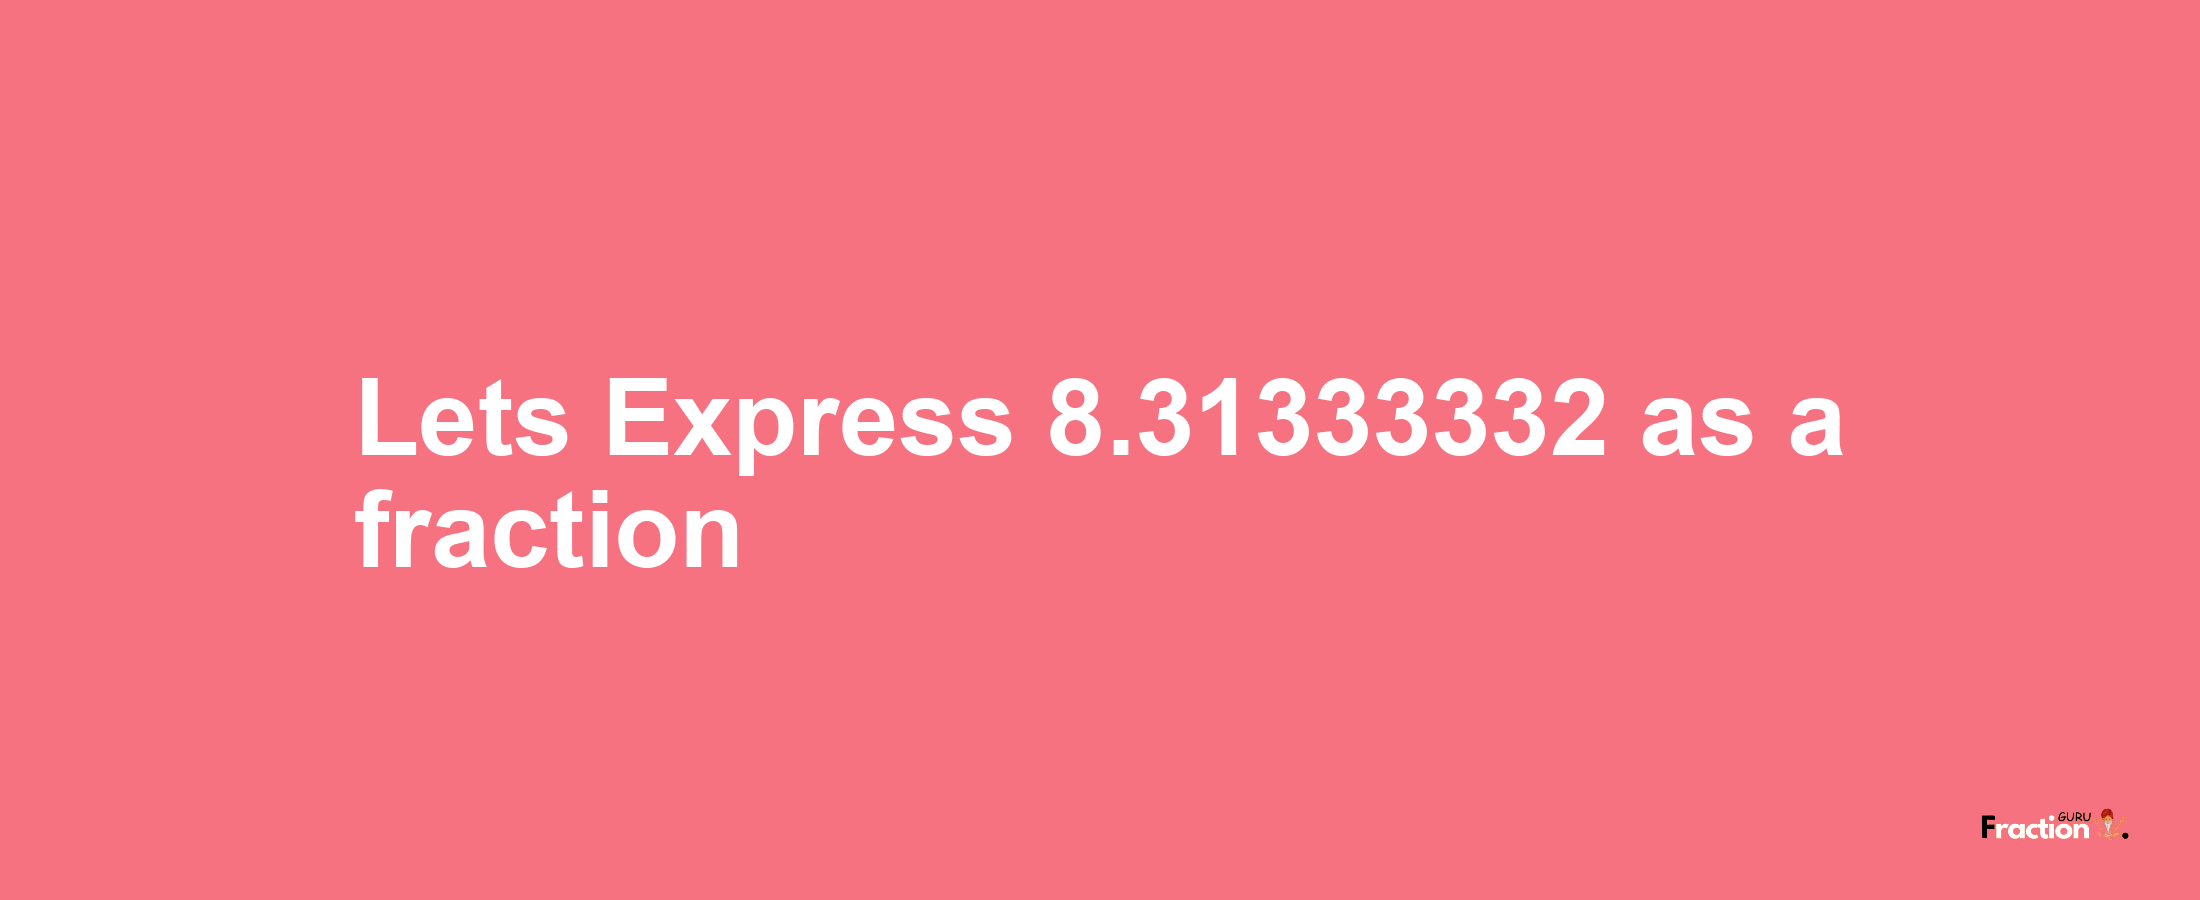 Lets Express 8.31333332 as afraction